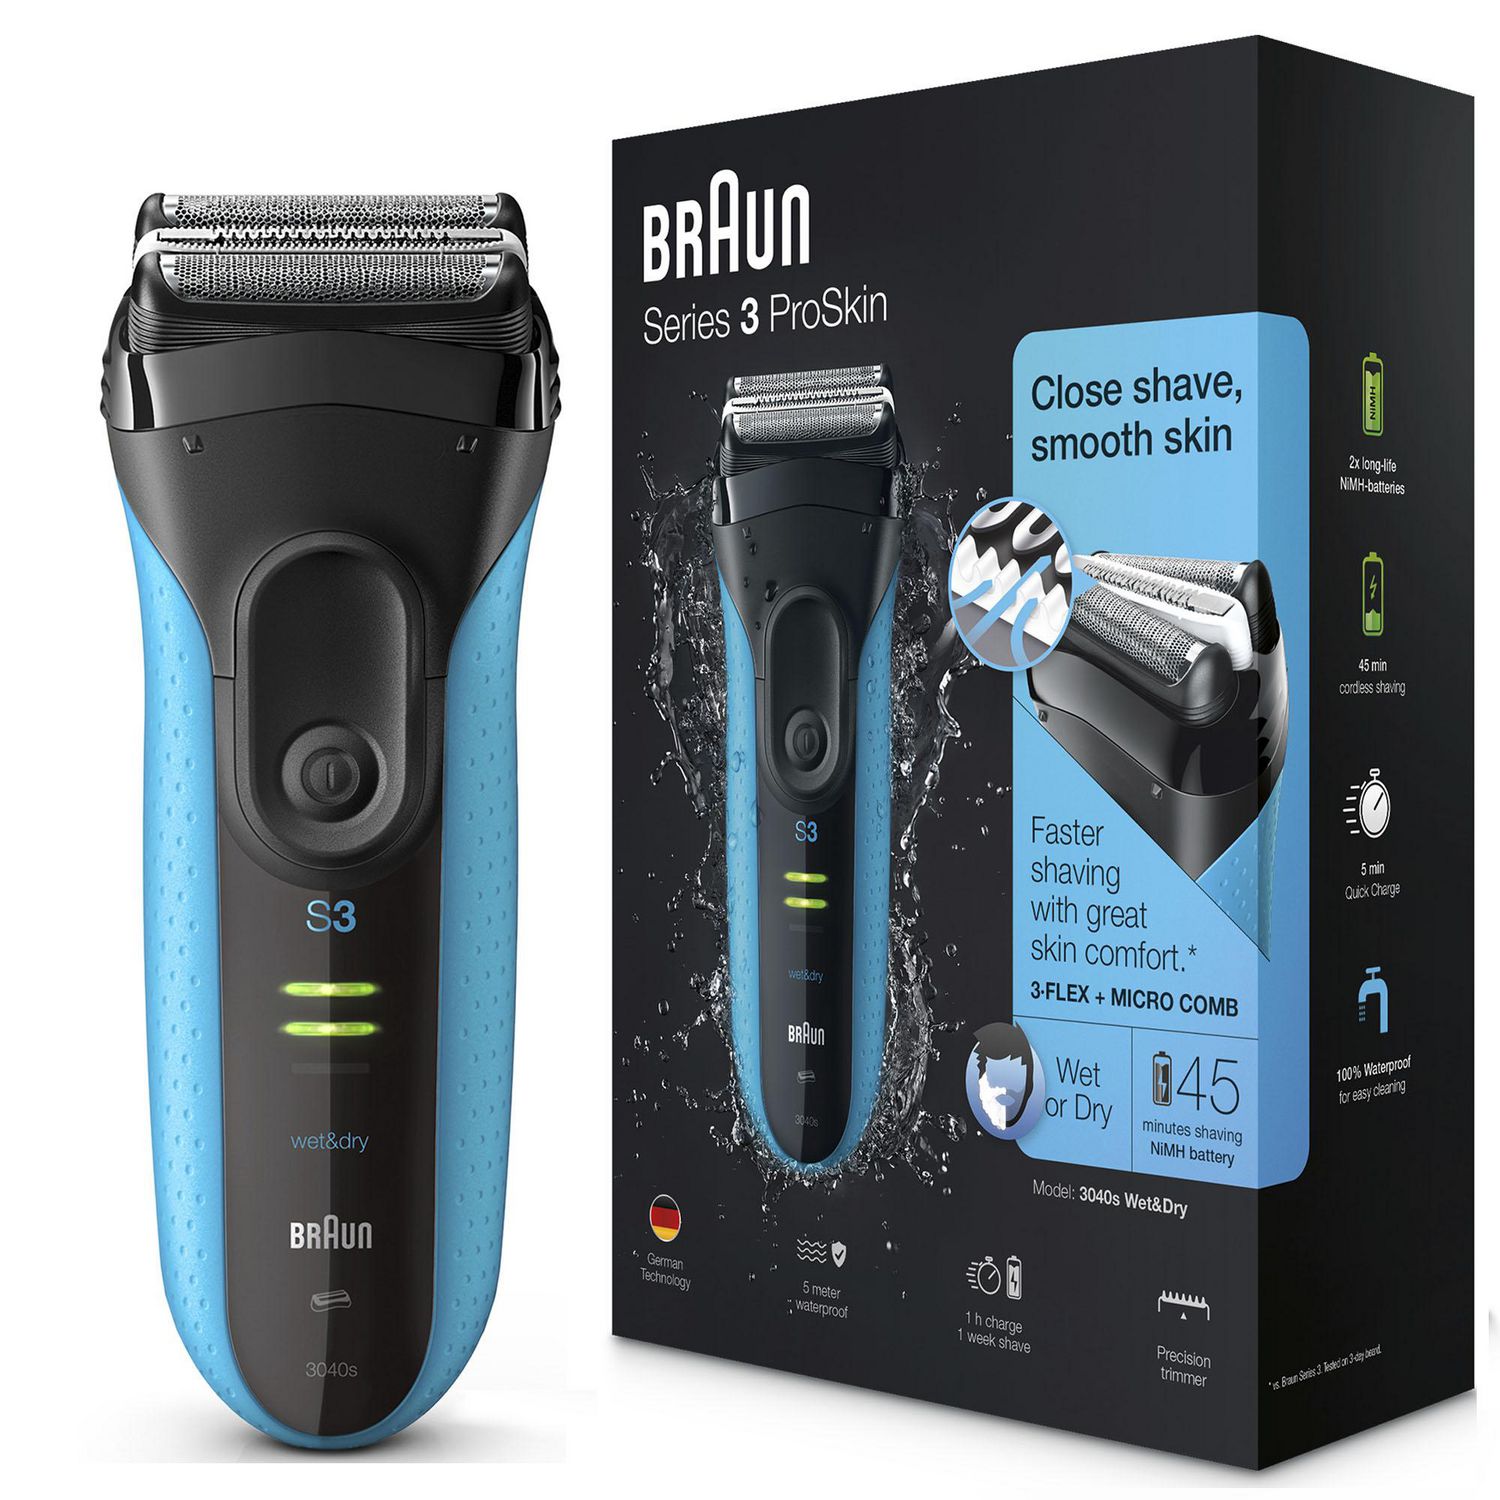 Braun Series 3 Proskin Shave&Style 1 and Dry Set Black/Blue, Razor Shaver, 3-in-1 Electric for Wet Men